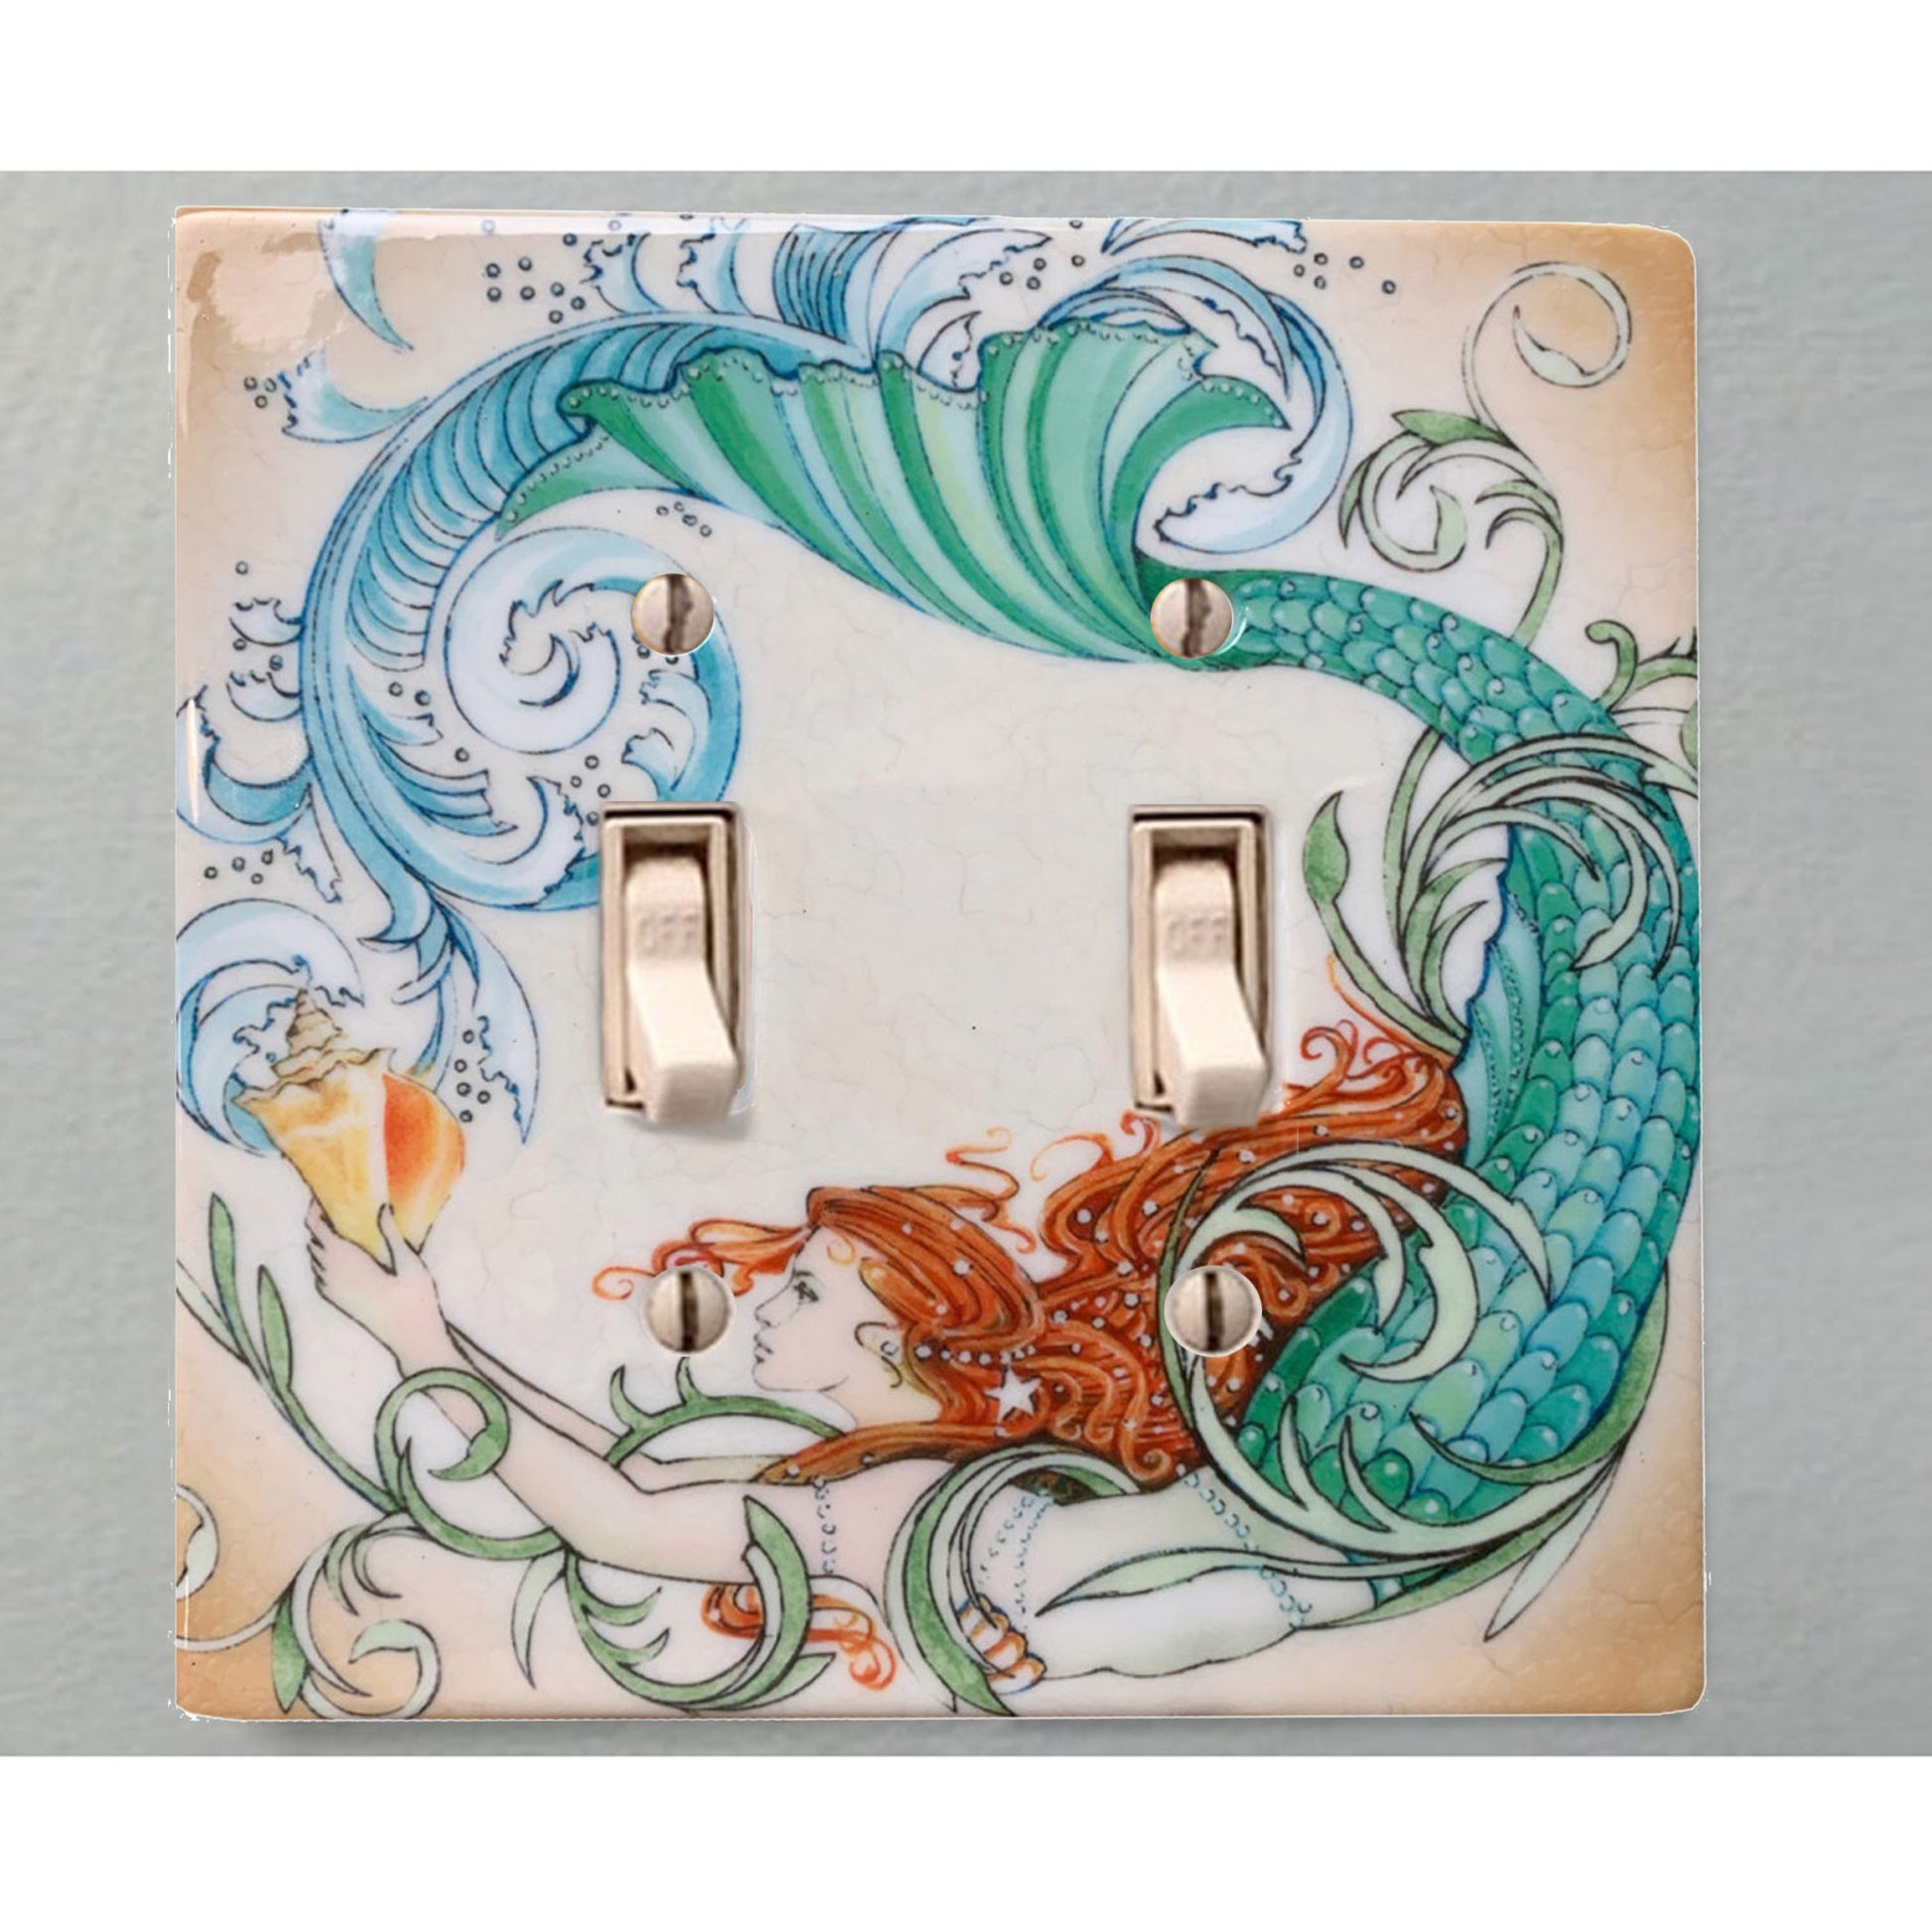 The Vintage Mermaid switch plate in use.